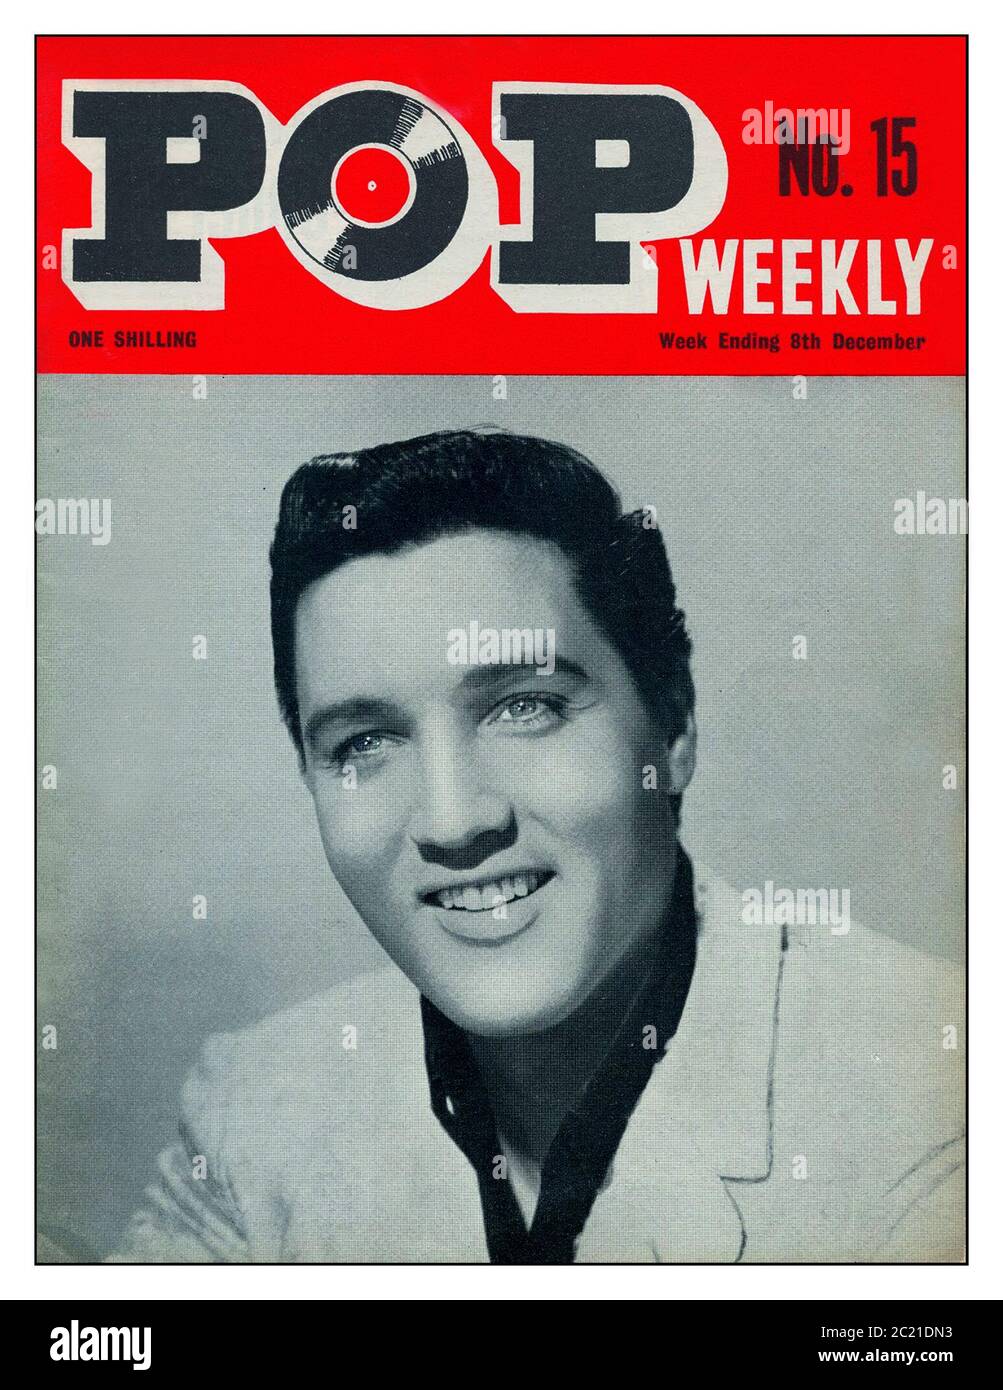 Elvis Presley Vintage 1960's British archive 'POP weekly' No 15 magazine featuring Elvis Presley promotional studio portrait front cover.  8th December 1963 priced at One Shilling £sd currency publication UK Teenagers music periodical news magazine for POP fans of the '60's Stock Photo